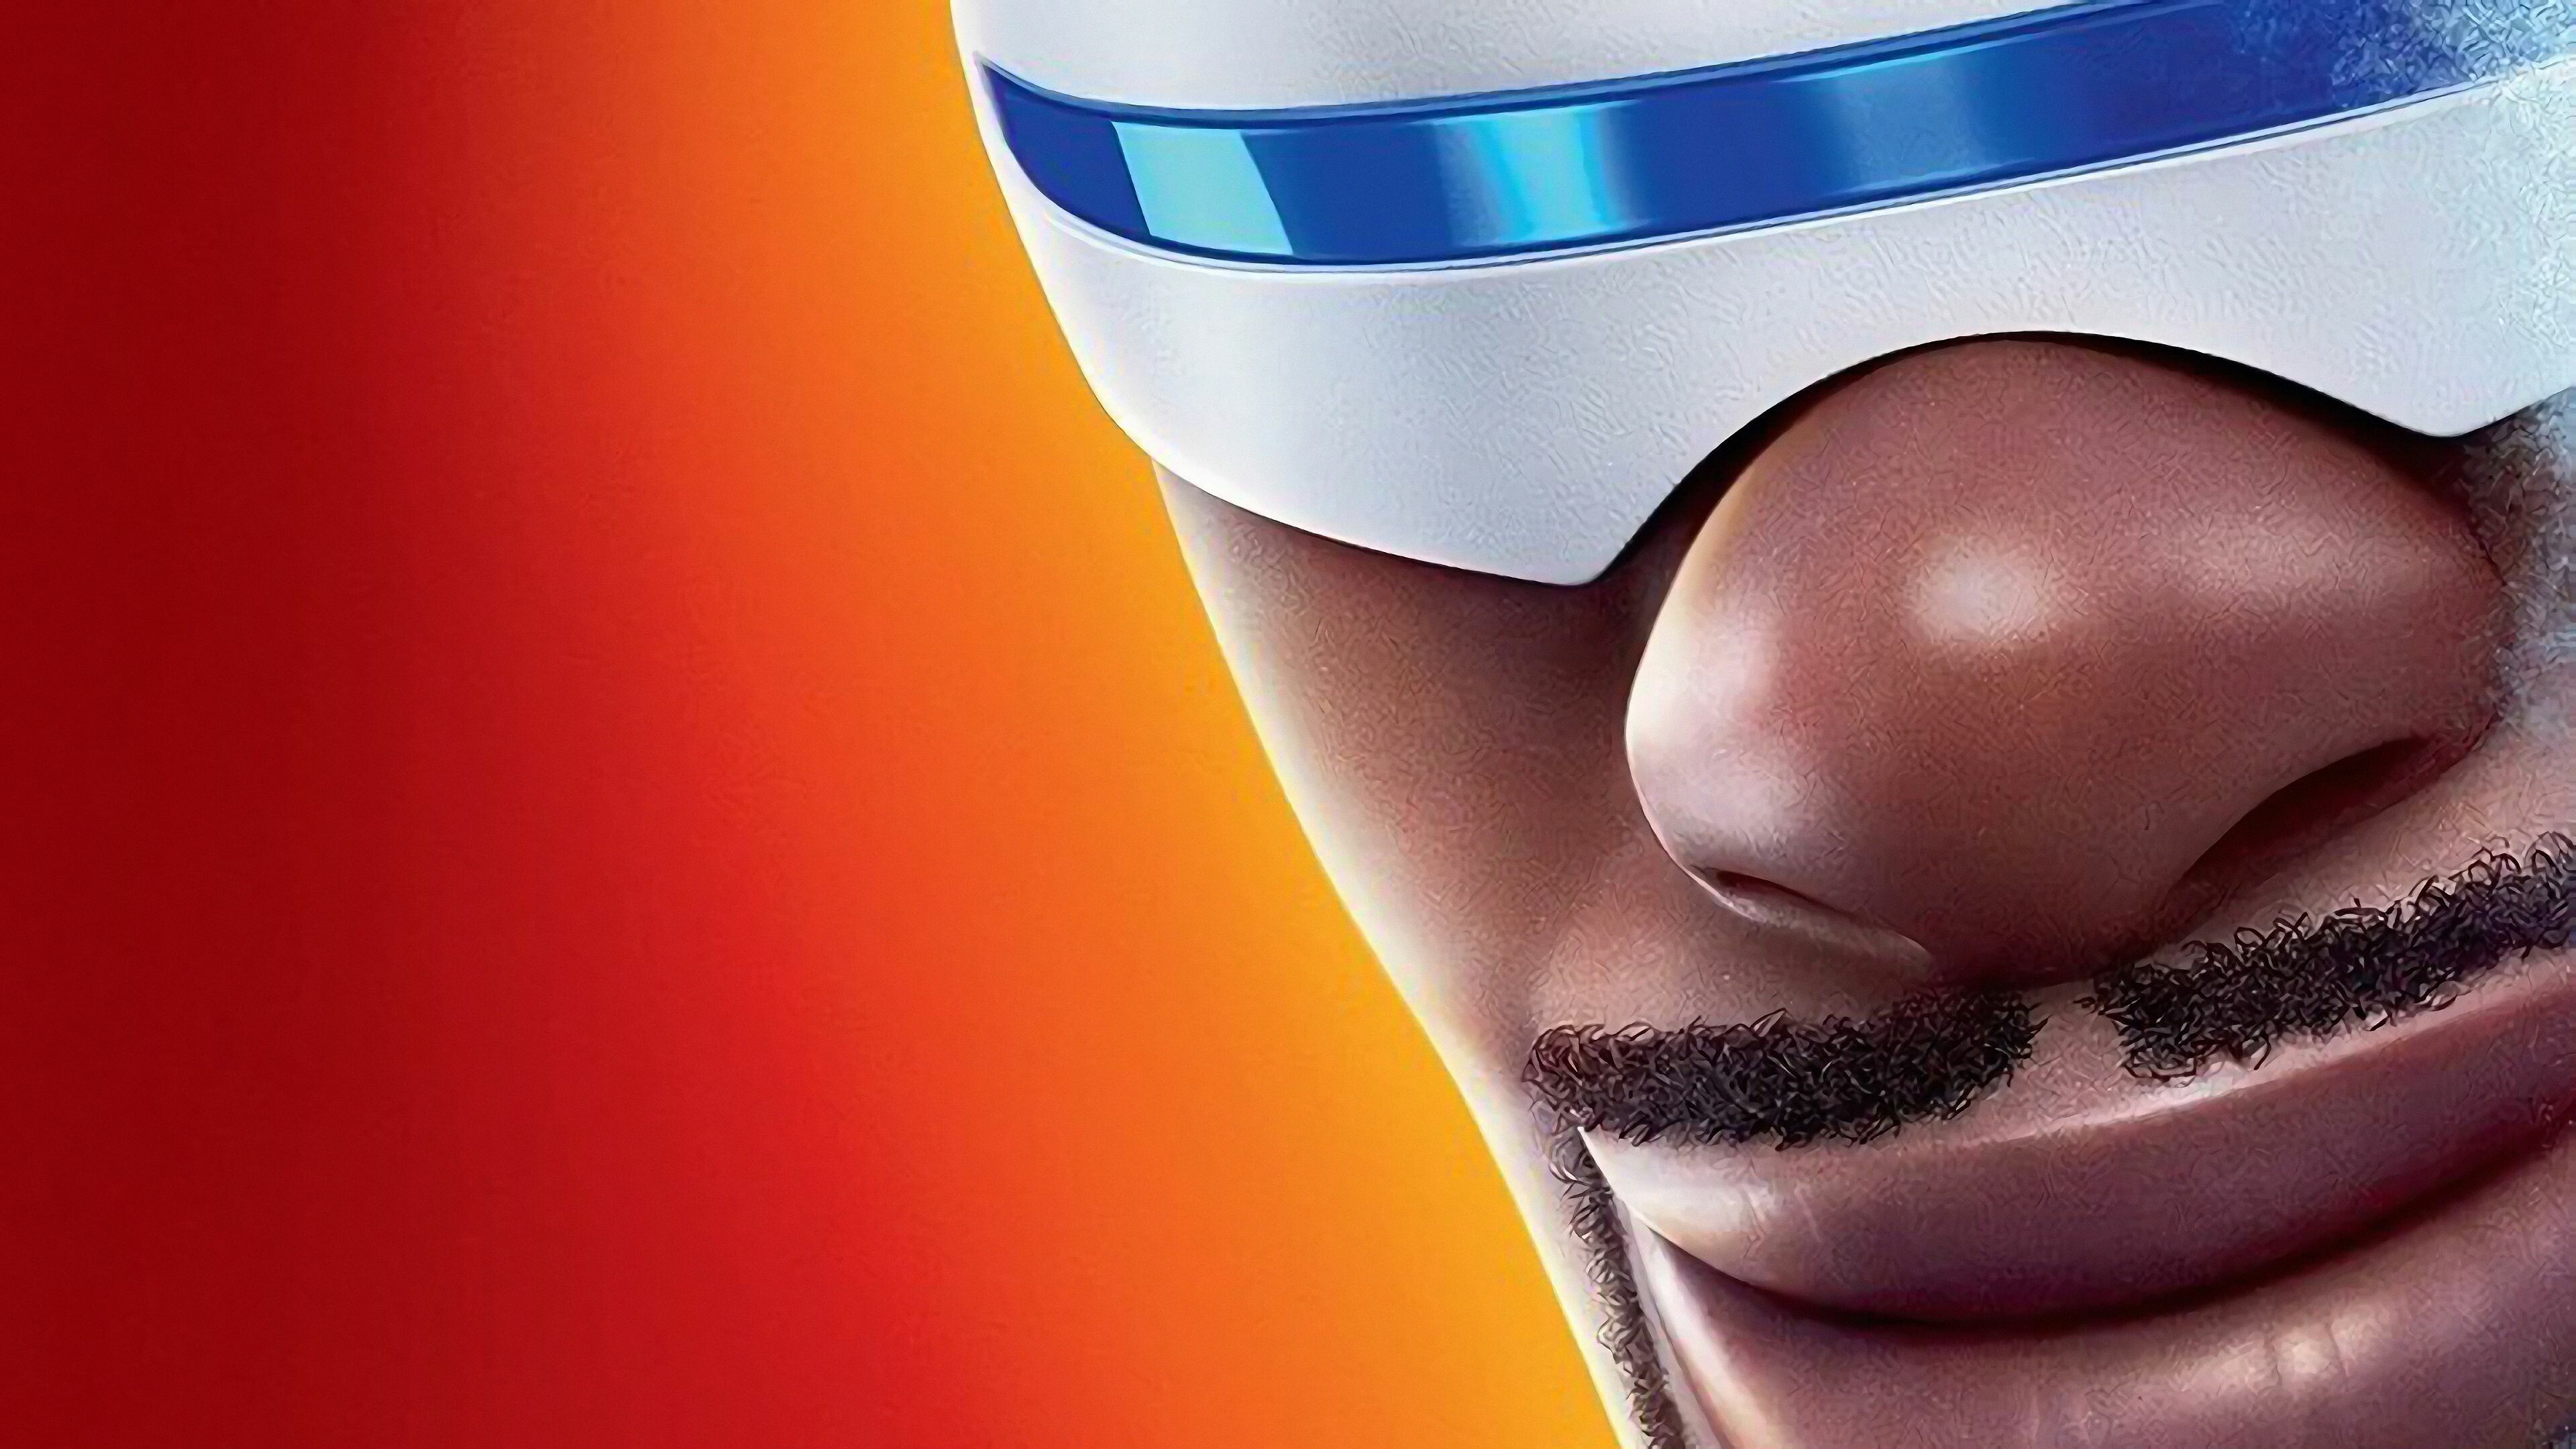 The Incredibles: Samuel L. Jackson as Lucius Best, Frozone. 3840x2160 4K Wallpaper.